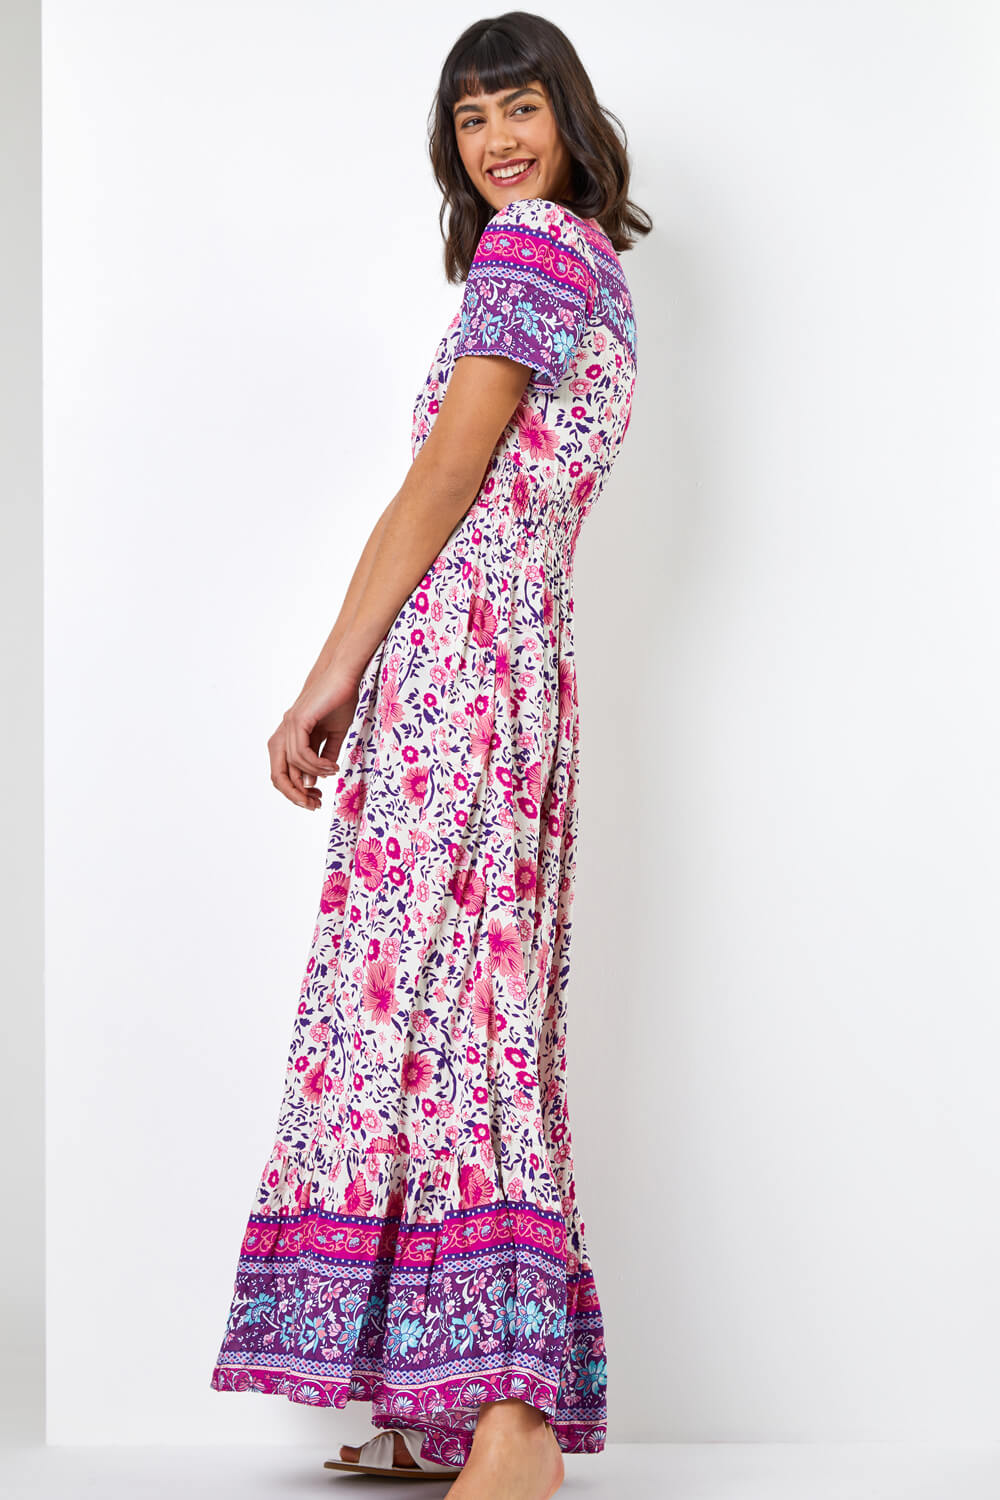 PINK Floral Shirred Waist Maxi Dress, Image 3 of 5